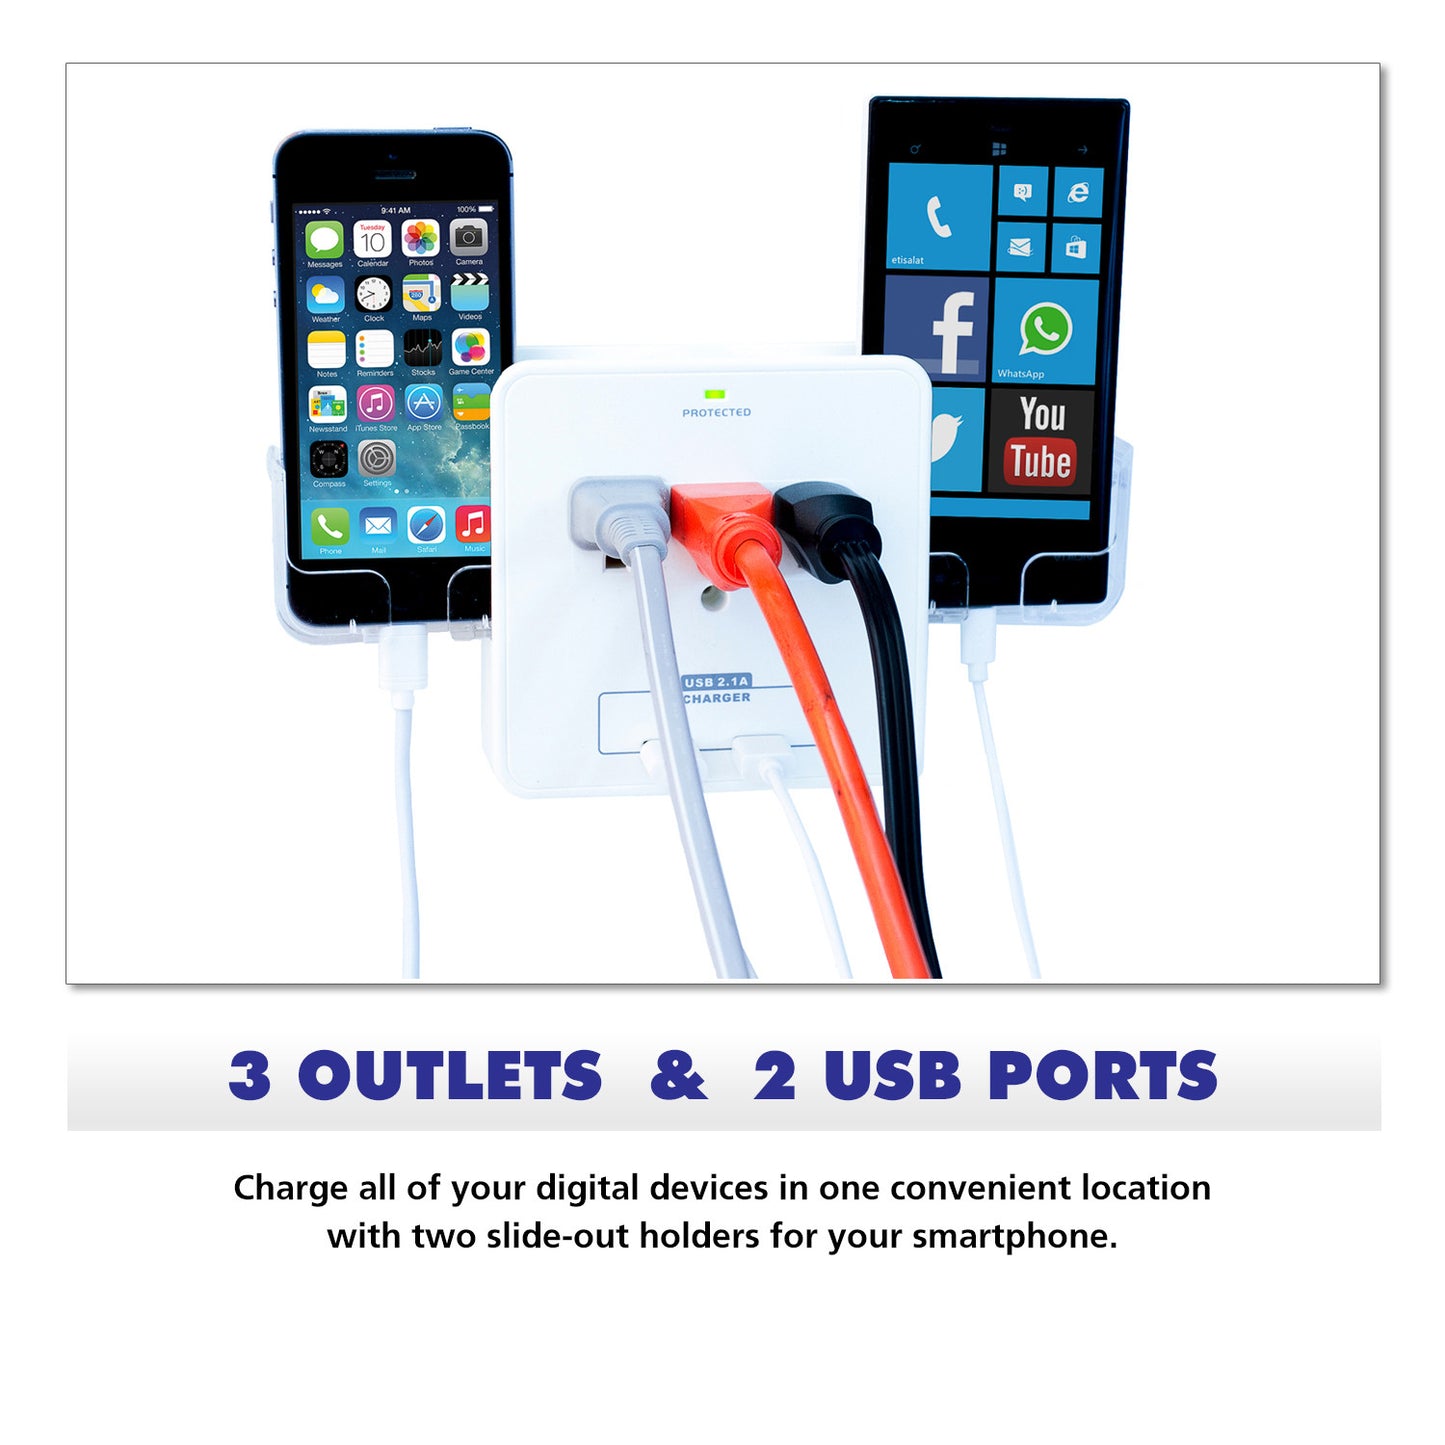 Wall Power Station includes 3 AC Plugs and 2 USB ports with Surge Protection and 2 slide-out holders for your smartphone by RND Power Solutions - RND Power Solutions - 2